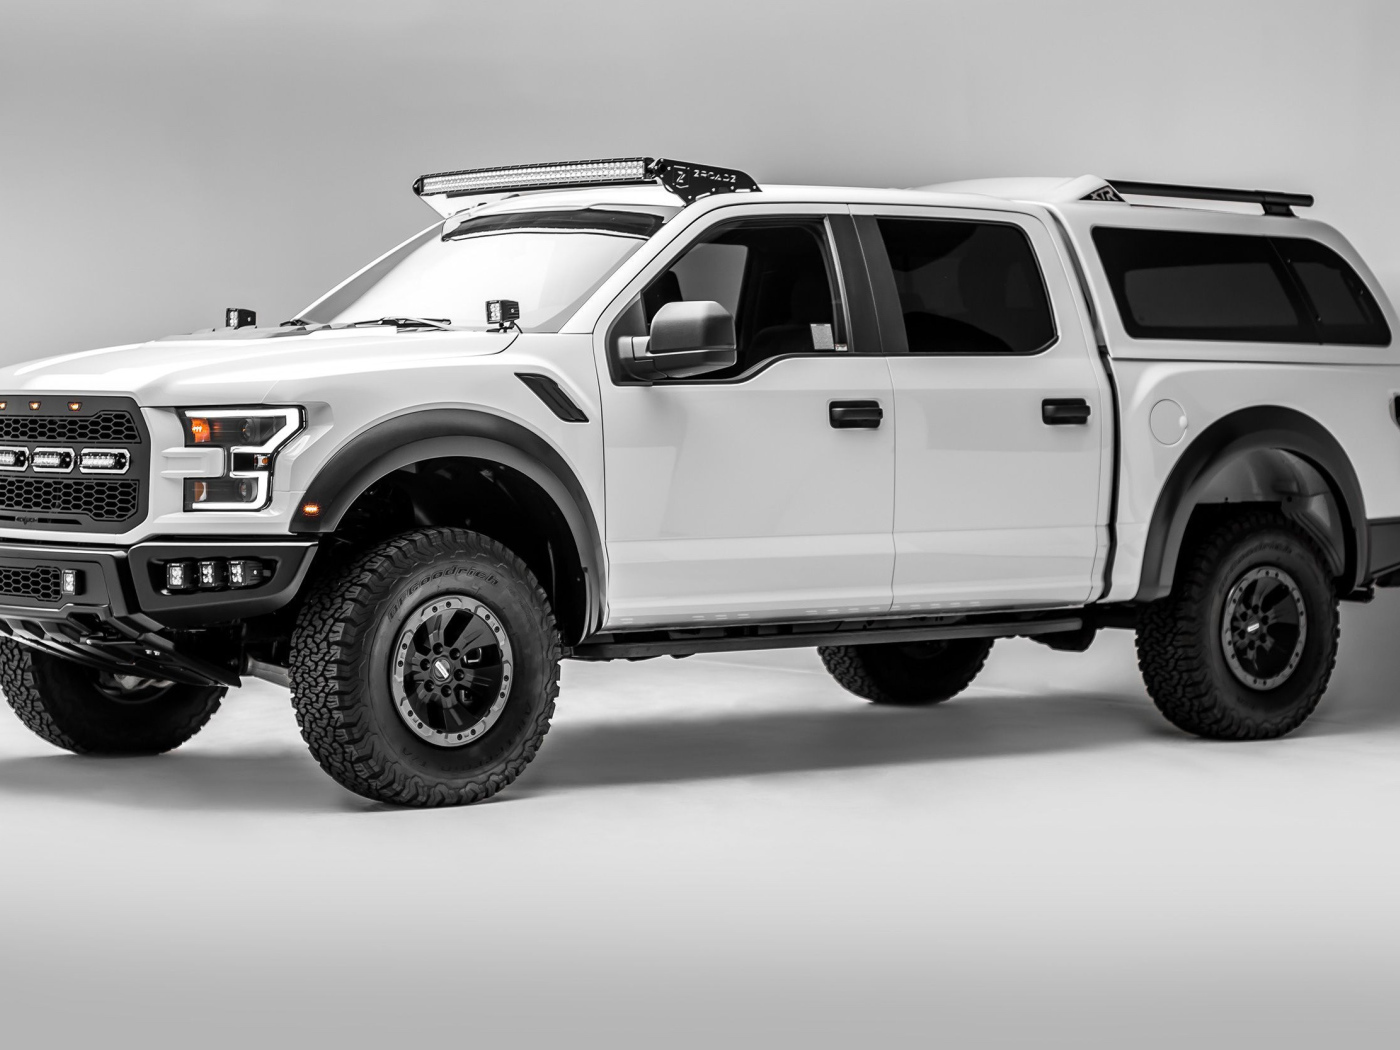 Large car pick-up FORD F-150, 2019